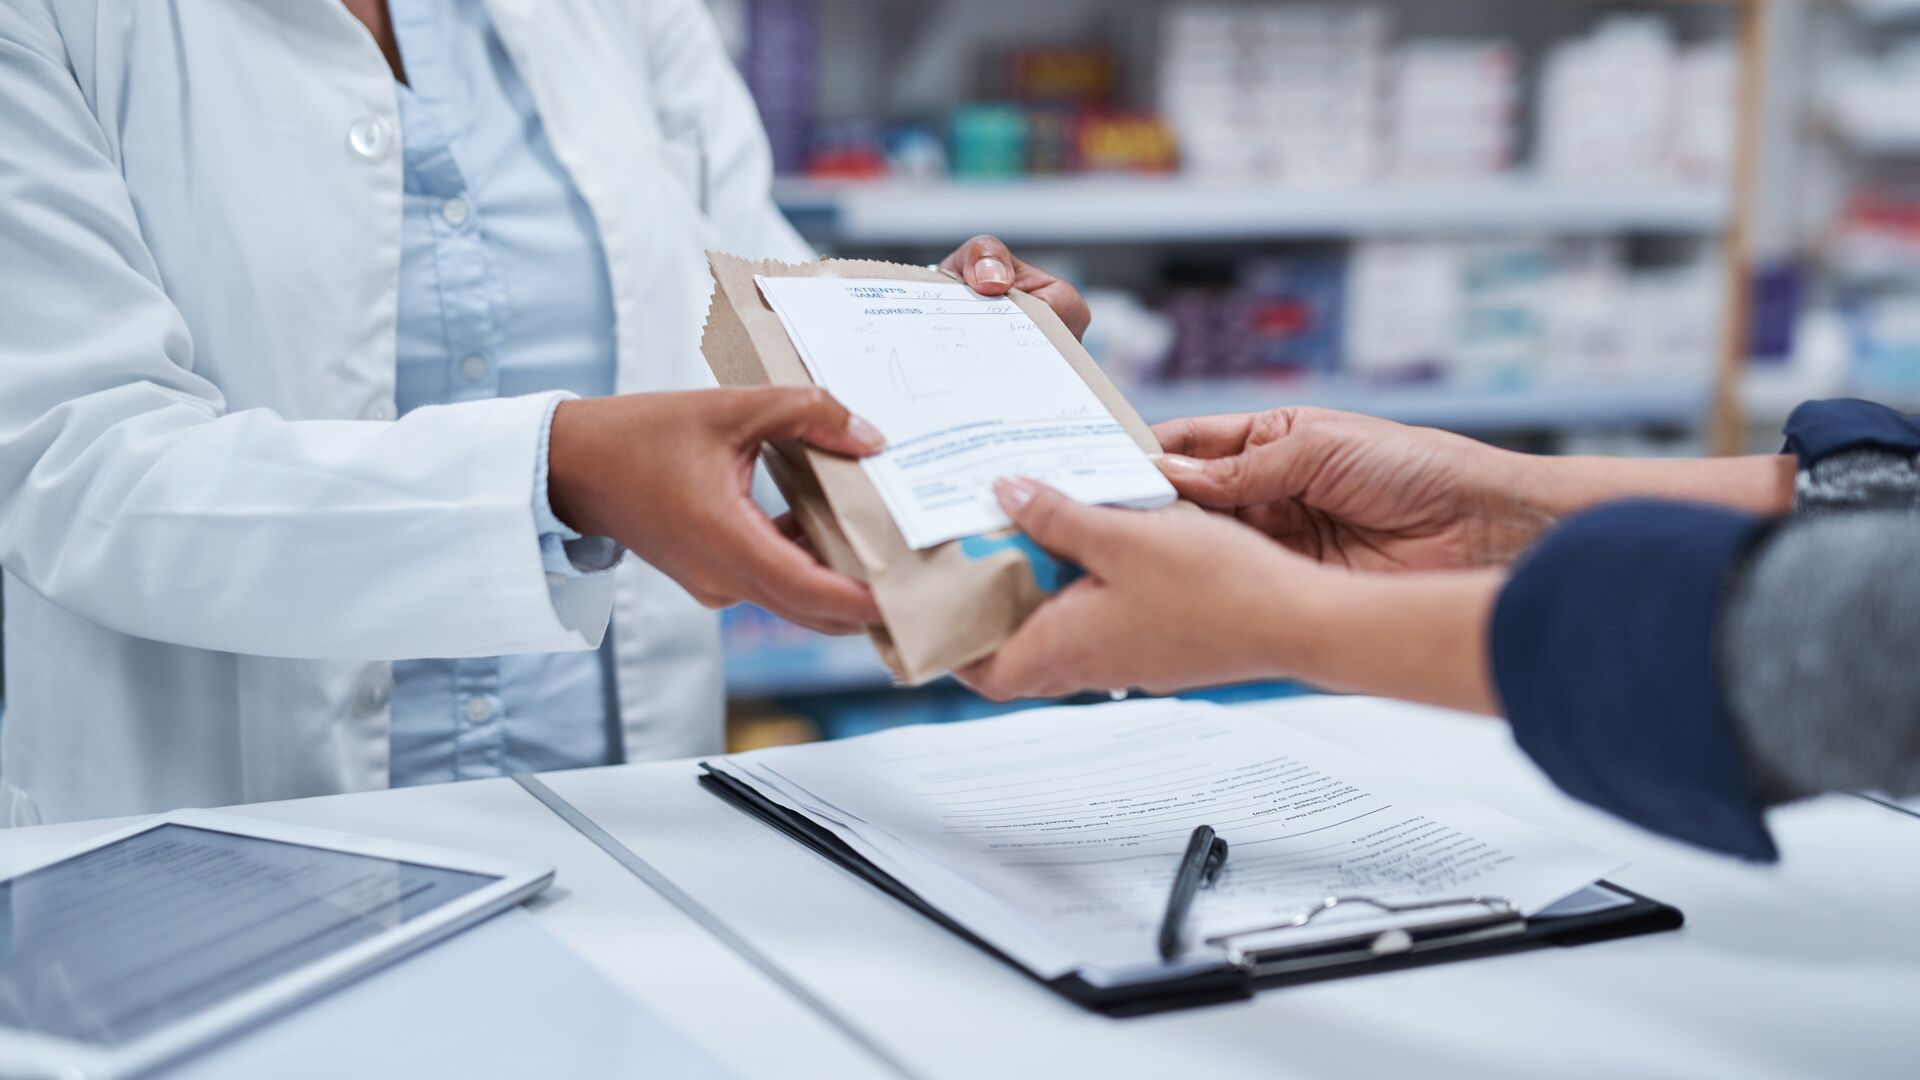 A pharmacist assists a customer by handing them their medication in a brown paper bag across the counter at a pharmacy.